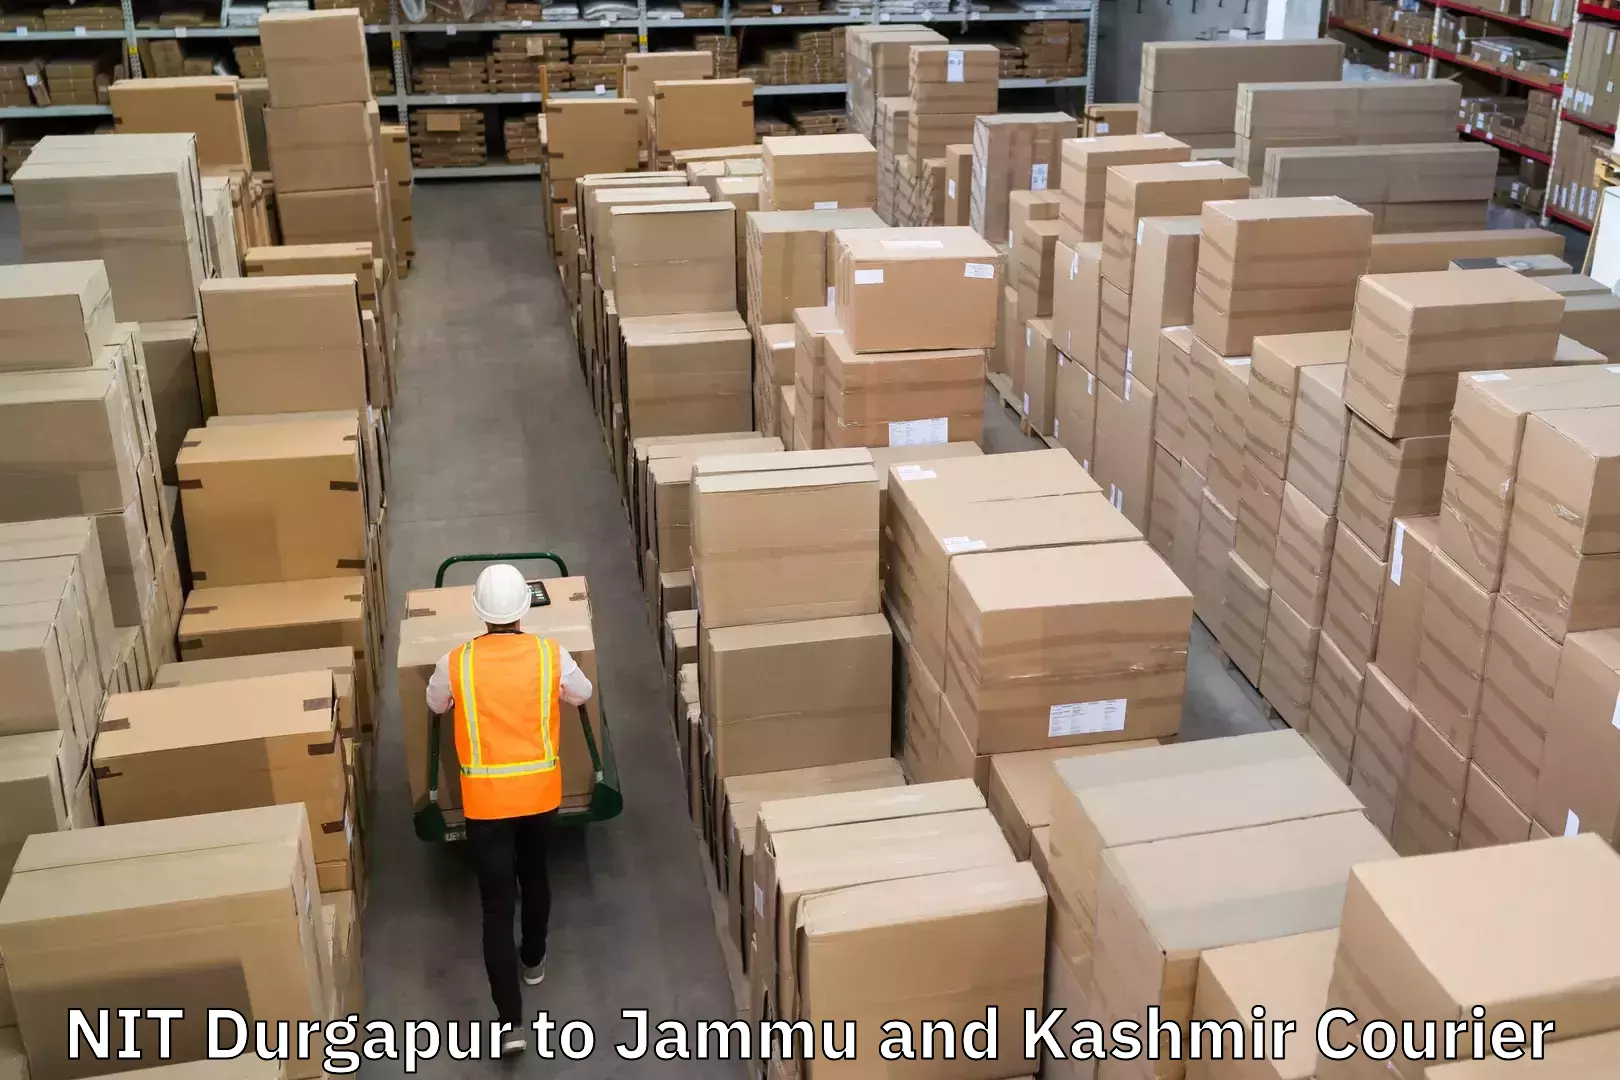 Subscription-based courier NIT Durgapur to Jammu and Kashmir